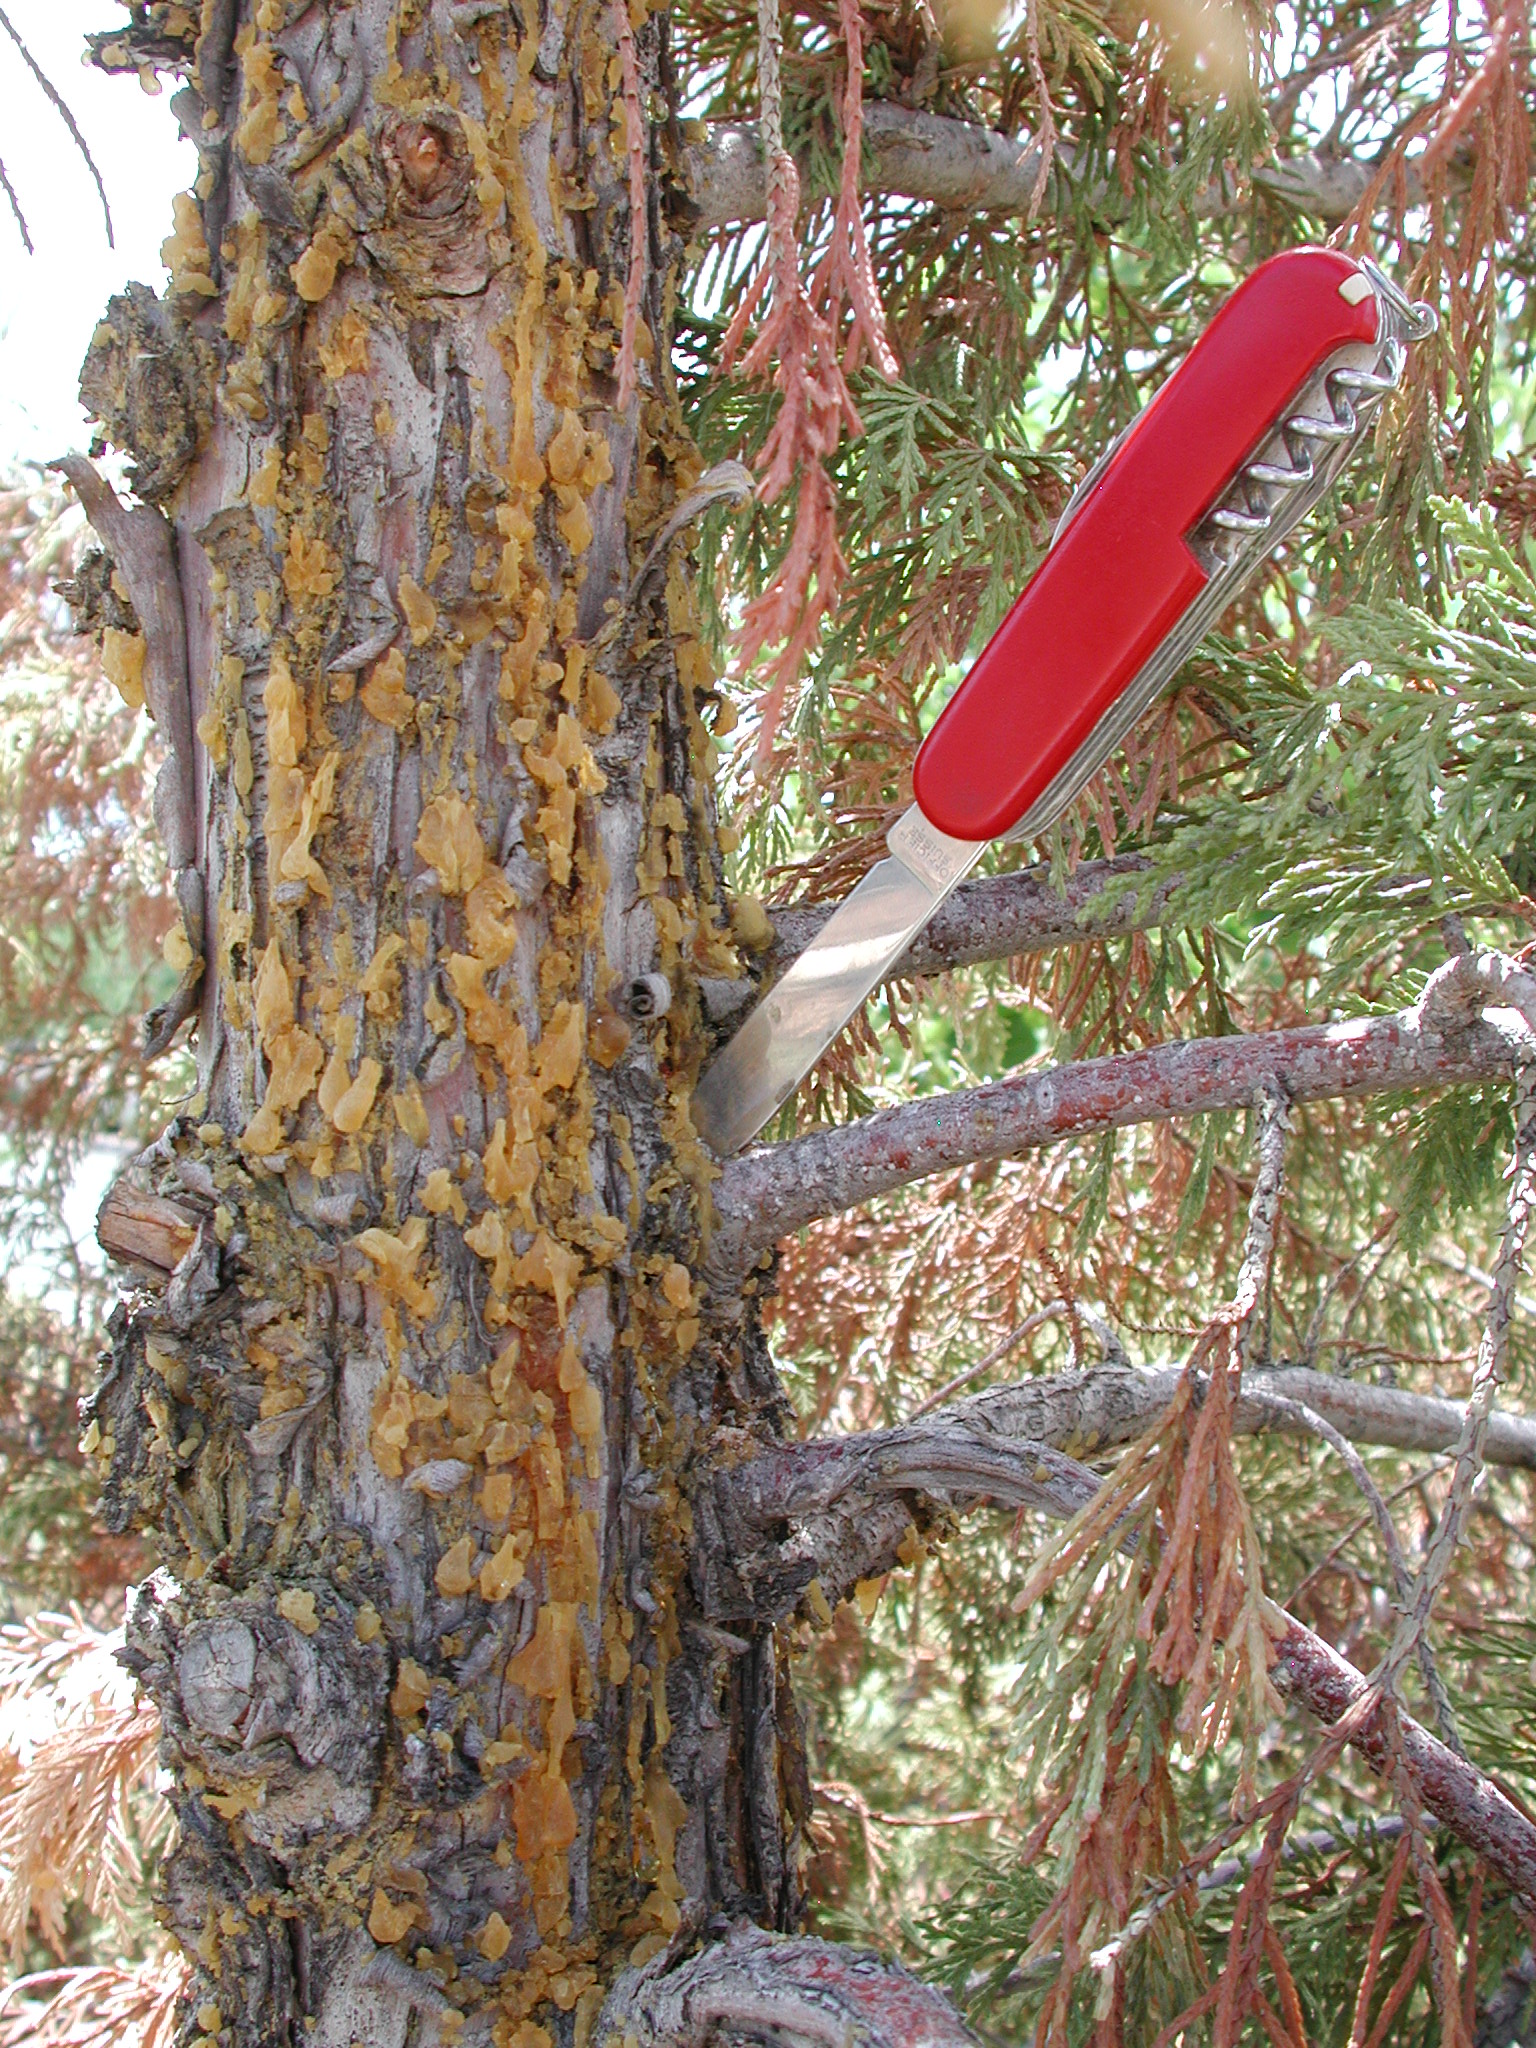 Sap exuding from trunk on Seiridium canker infected tree